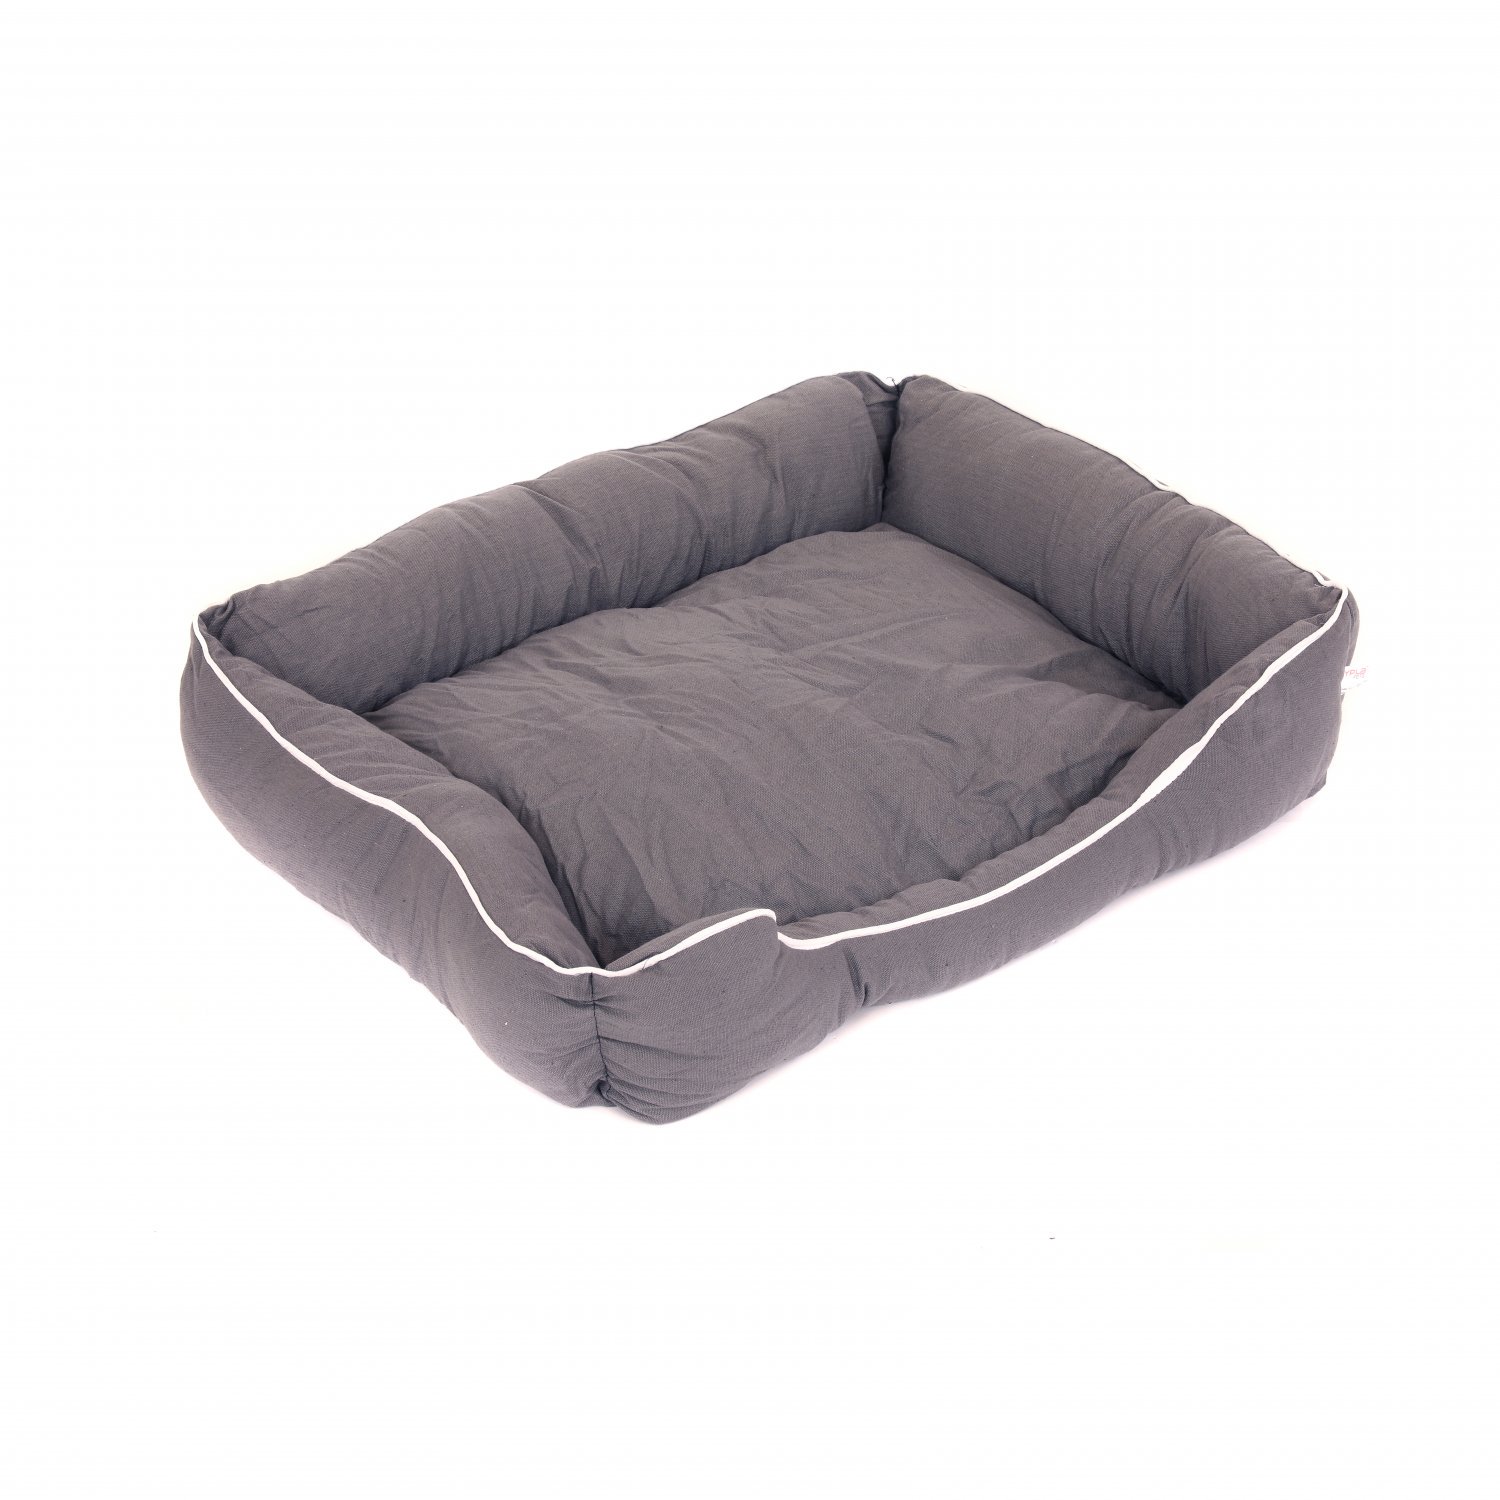 Deluxe Plush Soft Moisture Proof Large Sized Dog Bed - 75x60cm